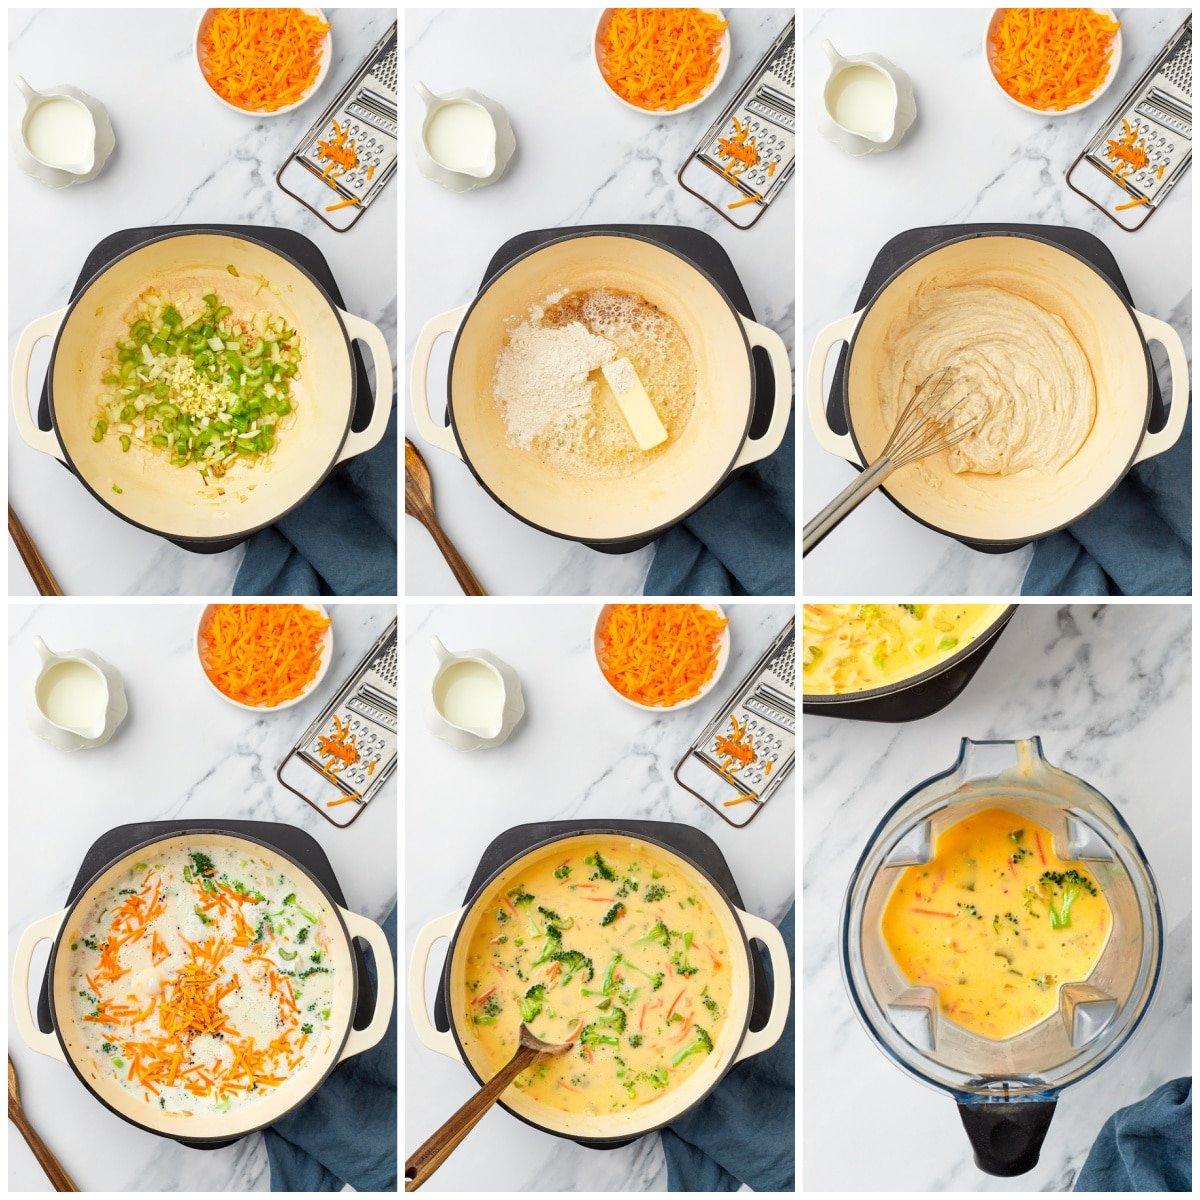 Step by step photos on how to make a Broccoli Cheddar Soup Recipe.